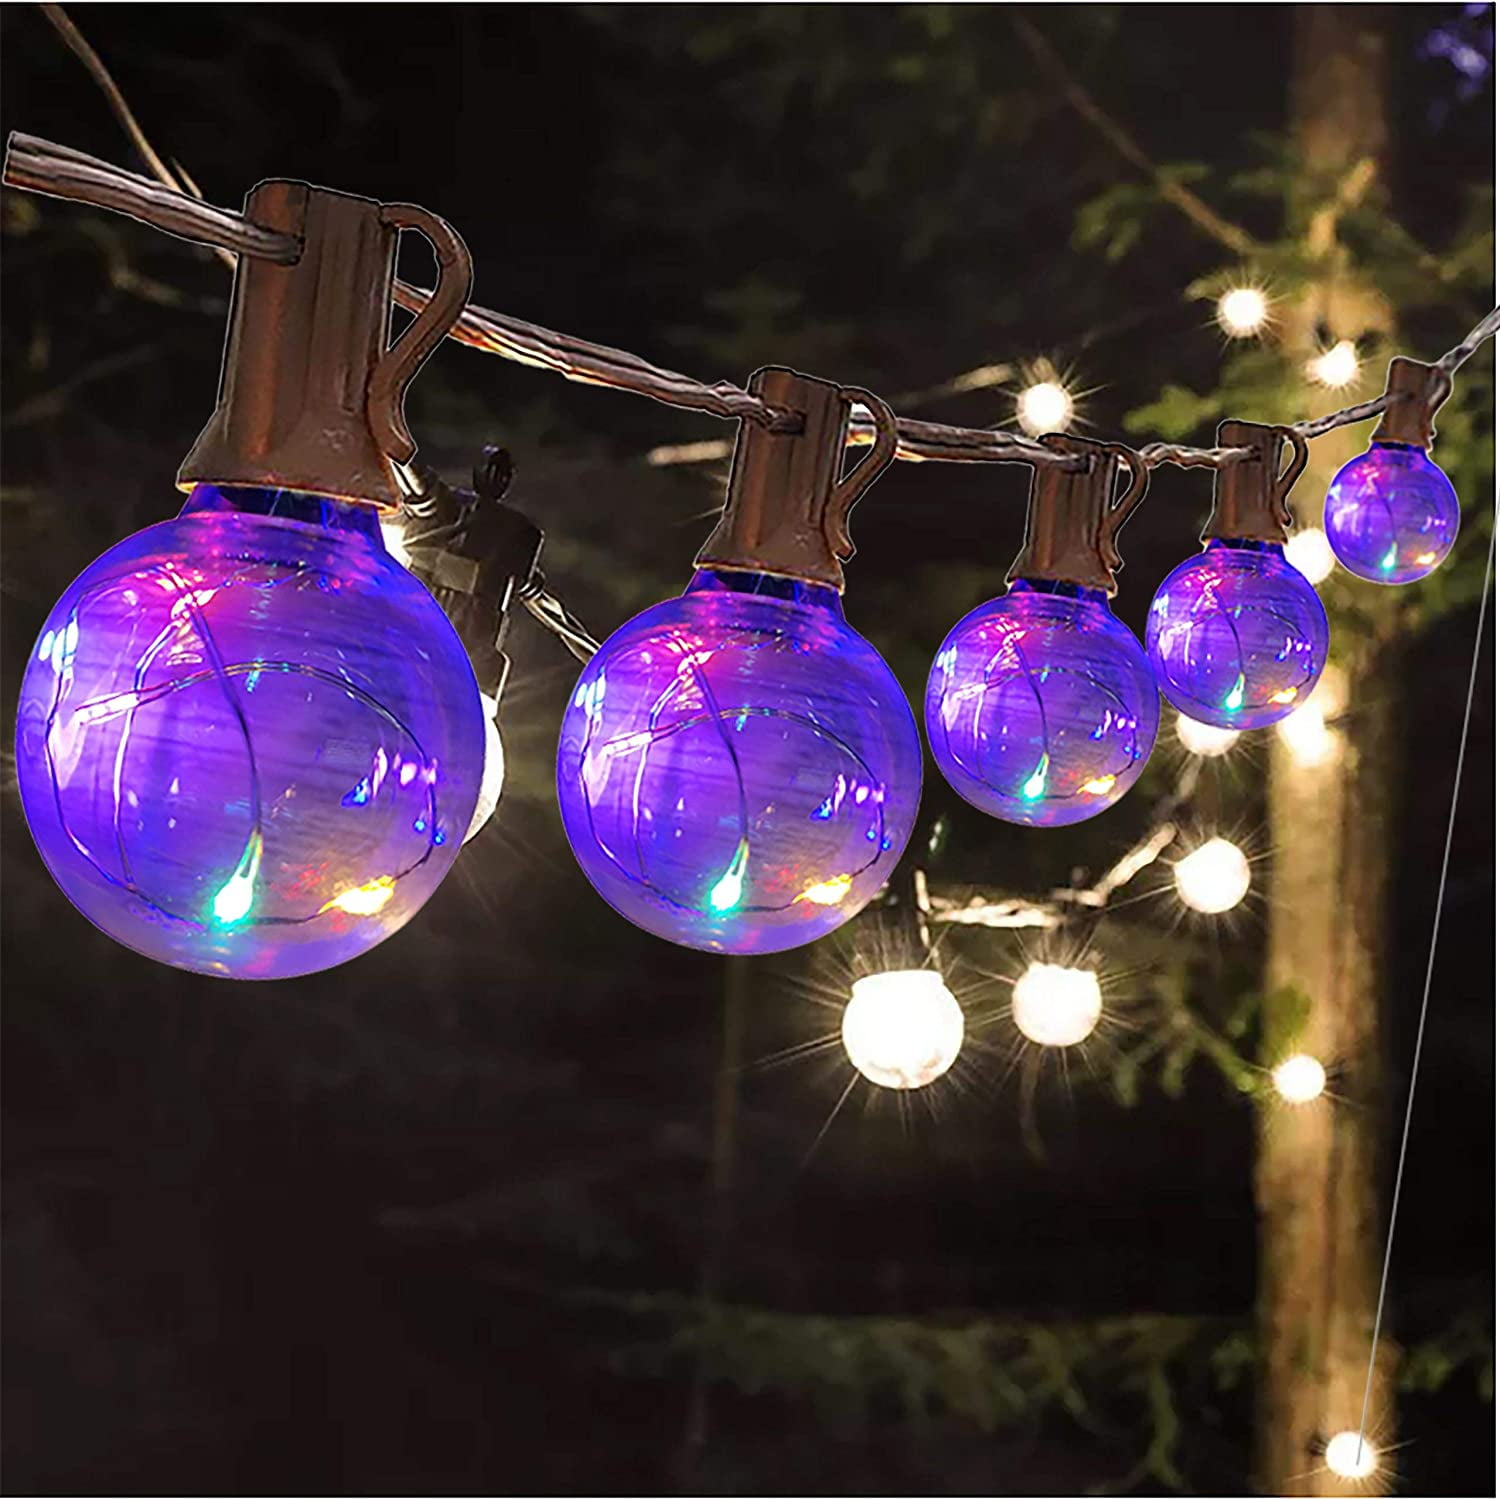 Details about   Clear Or Multi Colour Bulb Christmas Fairy Tree Lights Xmas Party Decoration New 